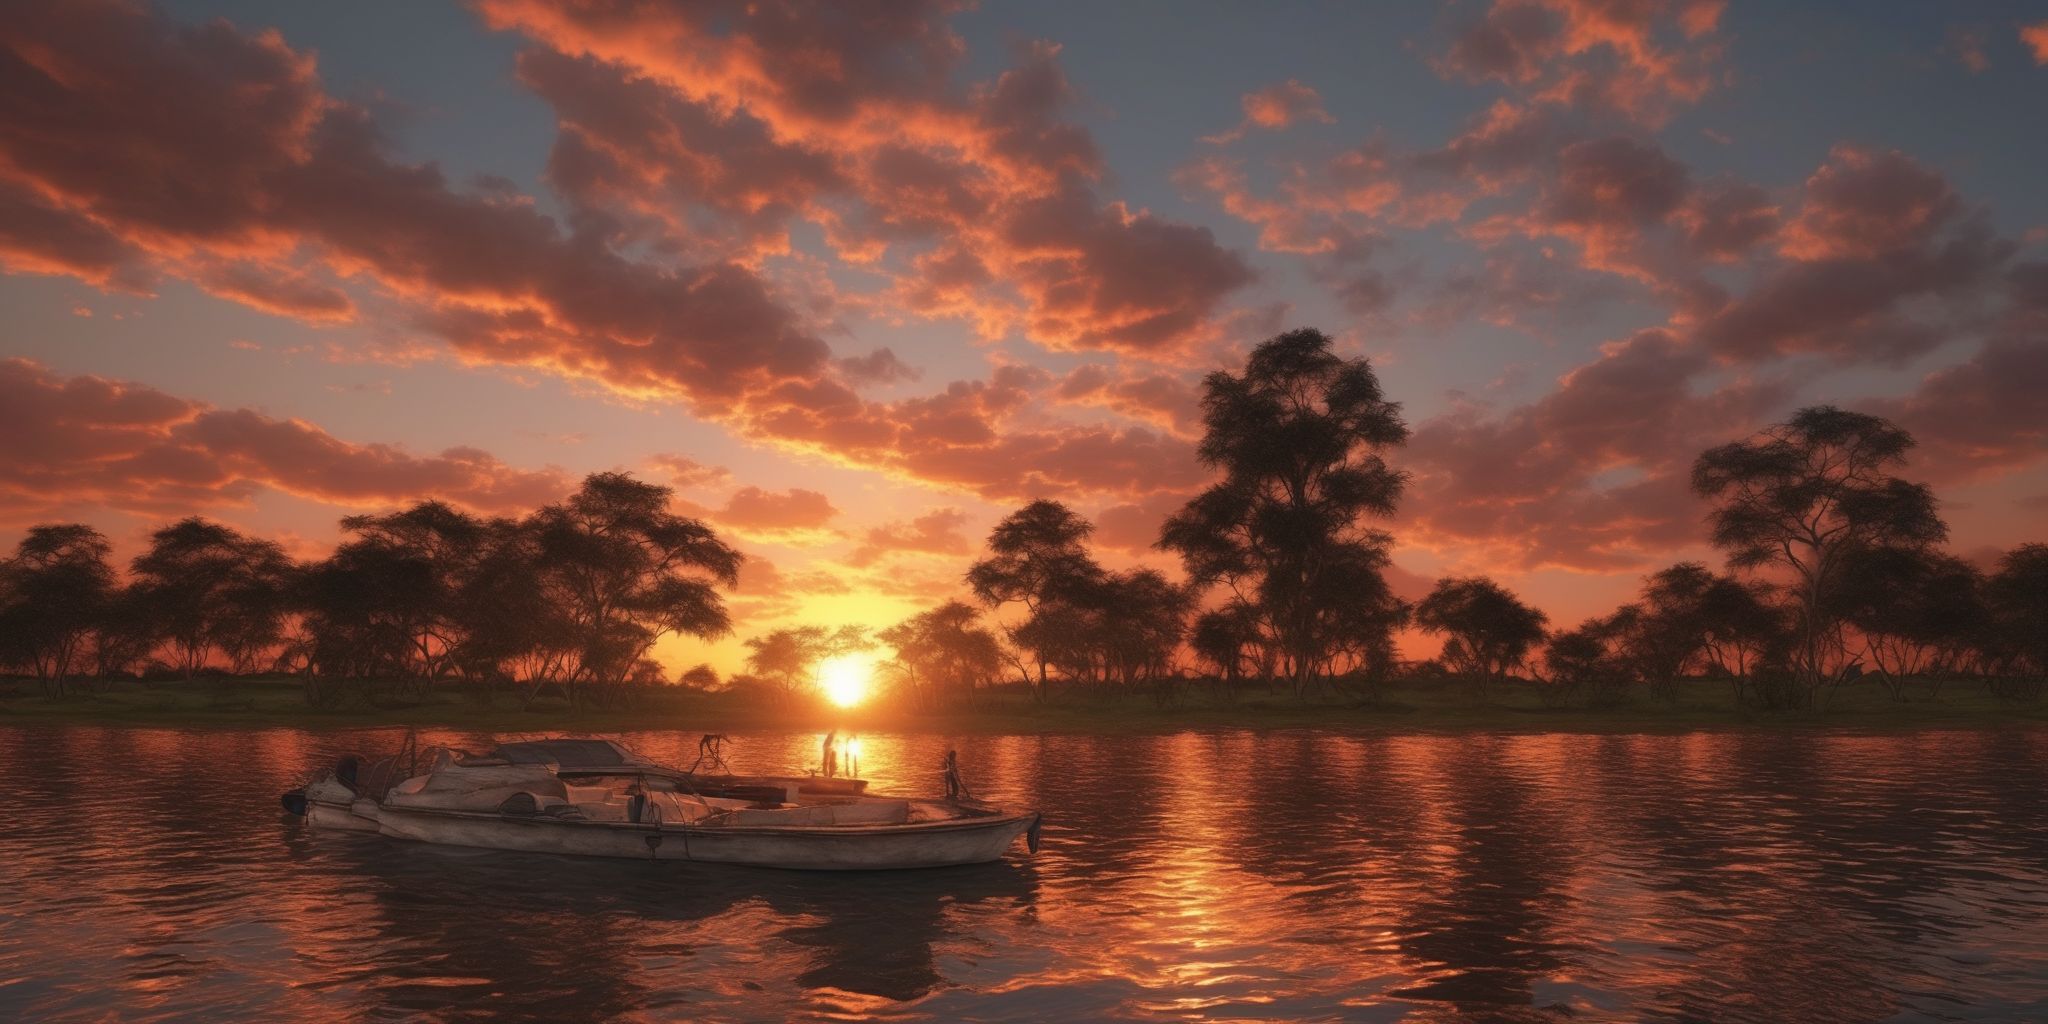 Sunset  in realistic, photographic style